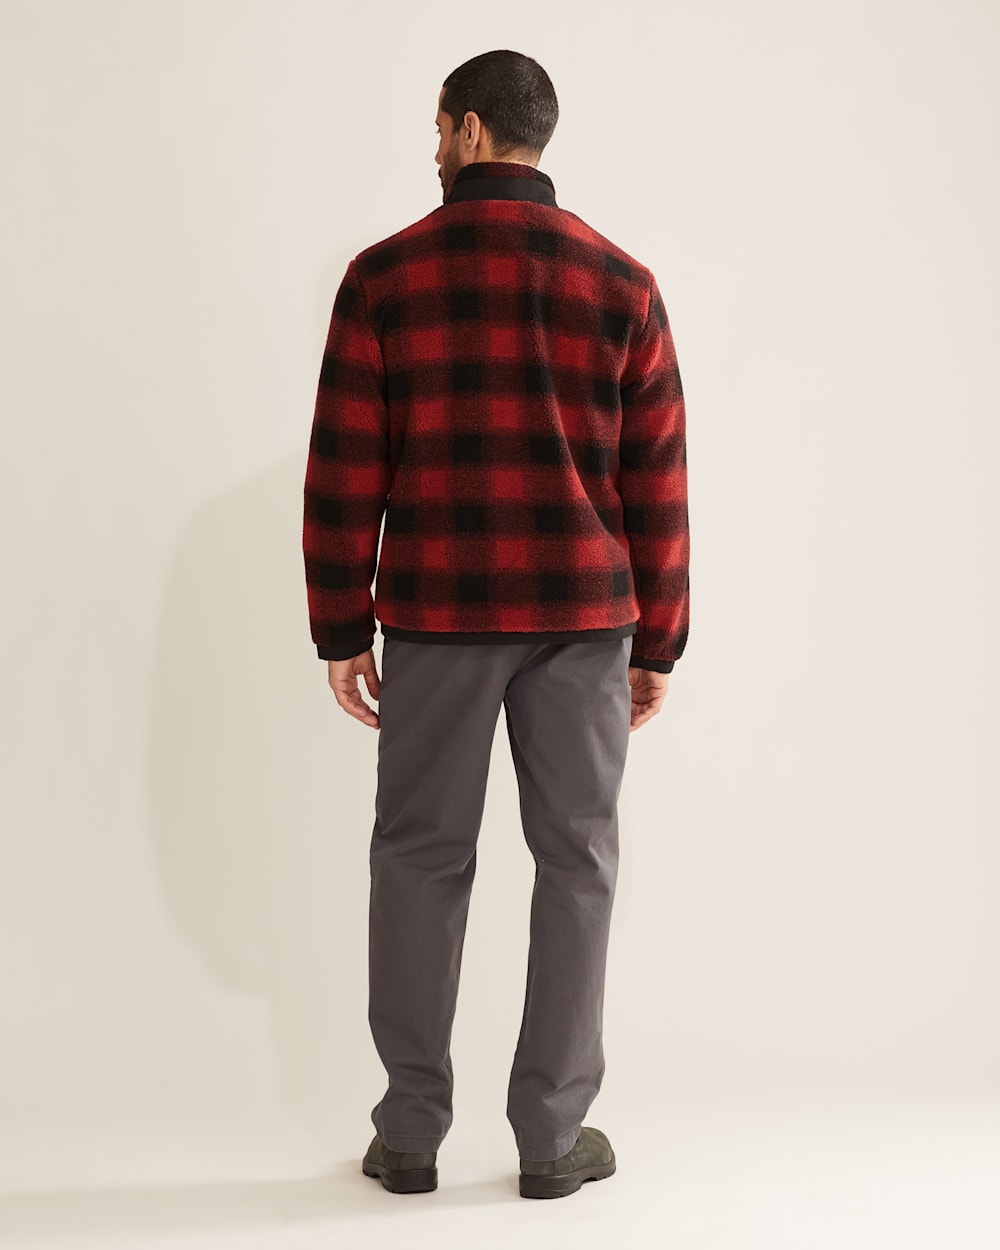 ALTERNATE VIEW OF MEN'S LONE FIR STAND-COLLAR FLEECE JACKET IN RED BUFFALO CHECK image number 3